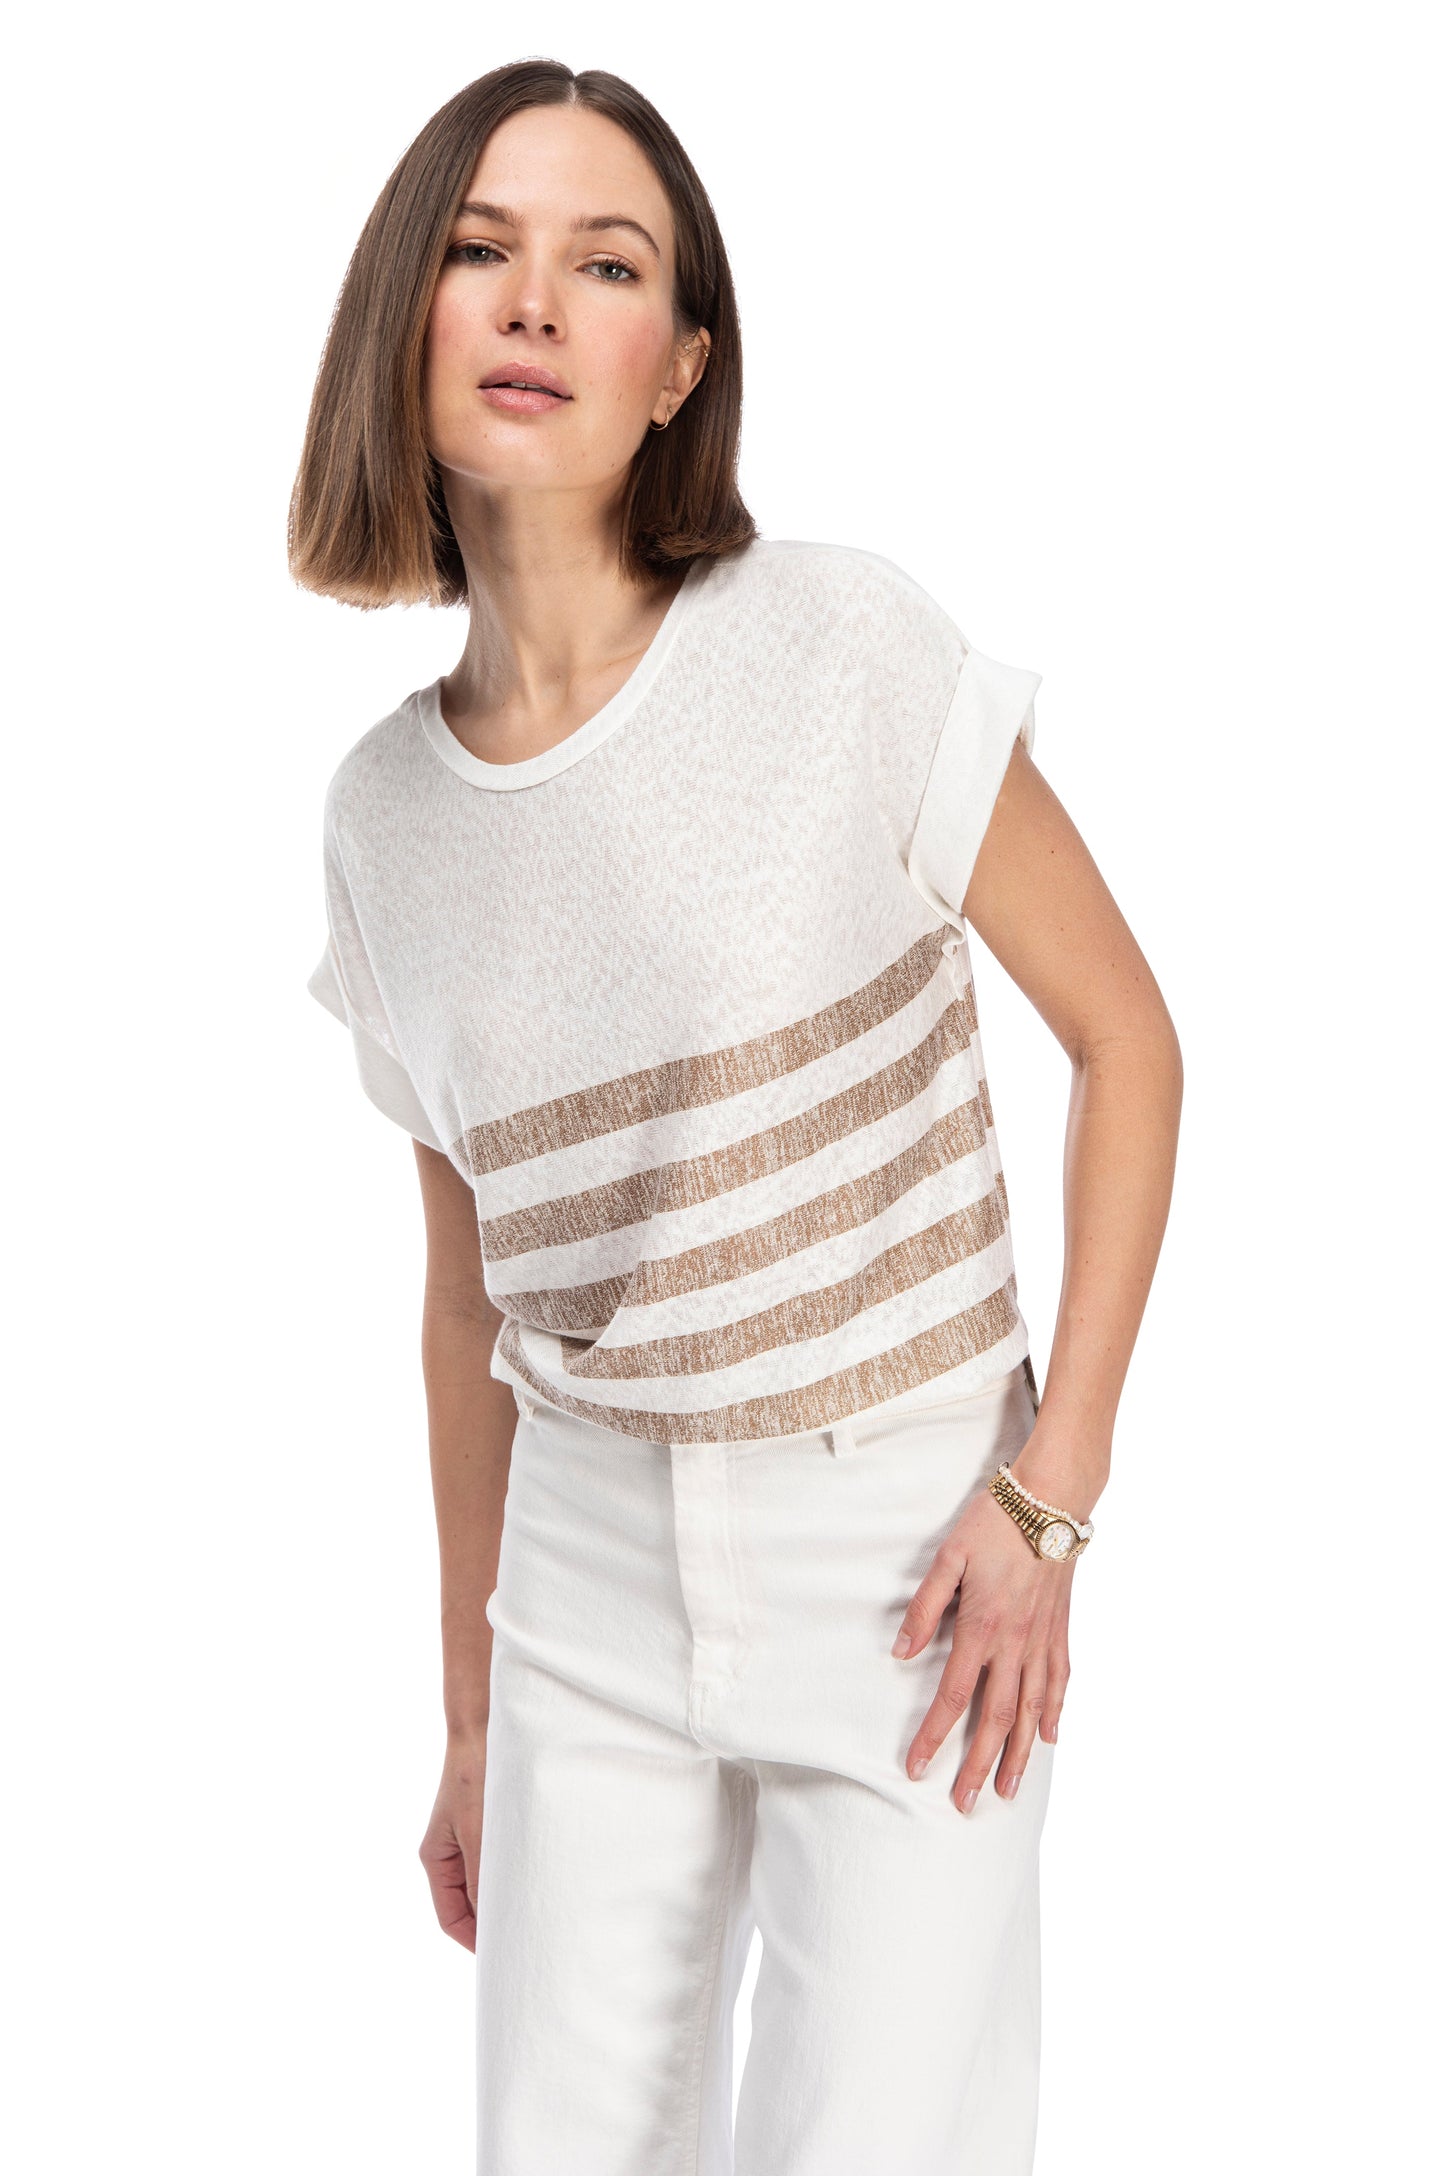 A confident woman in a B Collection by Bobeau CATY STRAP TUNIC TEE paired with white pants, sporting a modern look against a white background.